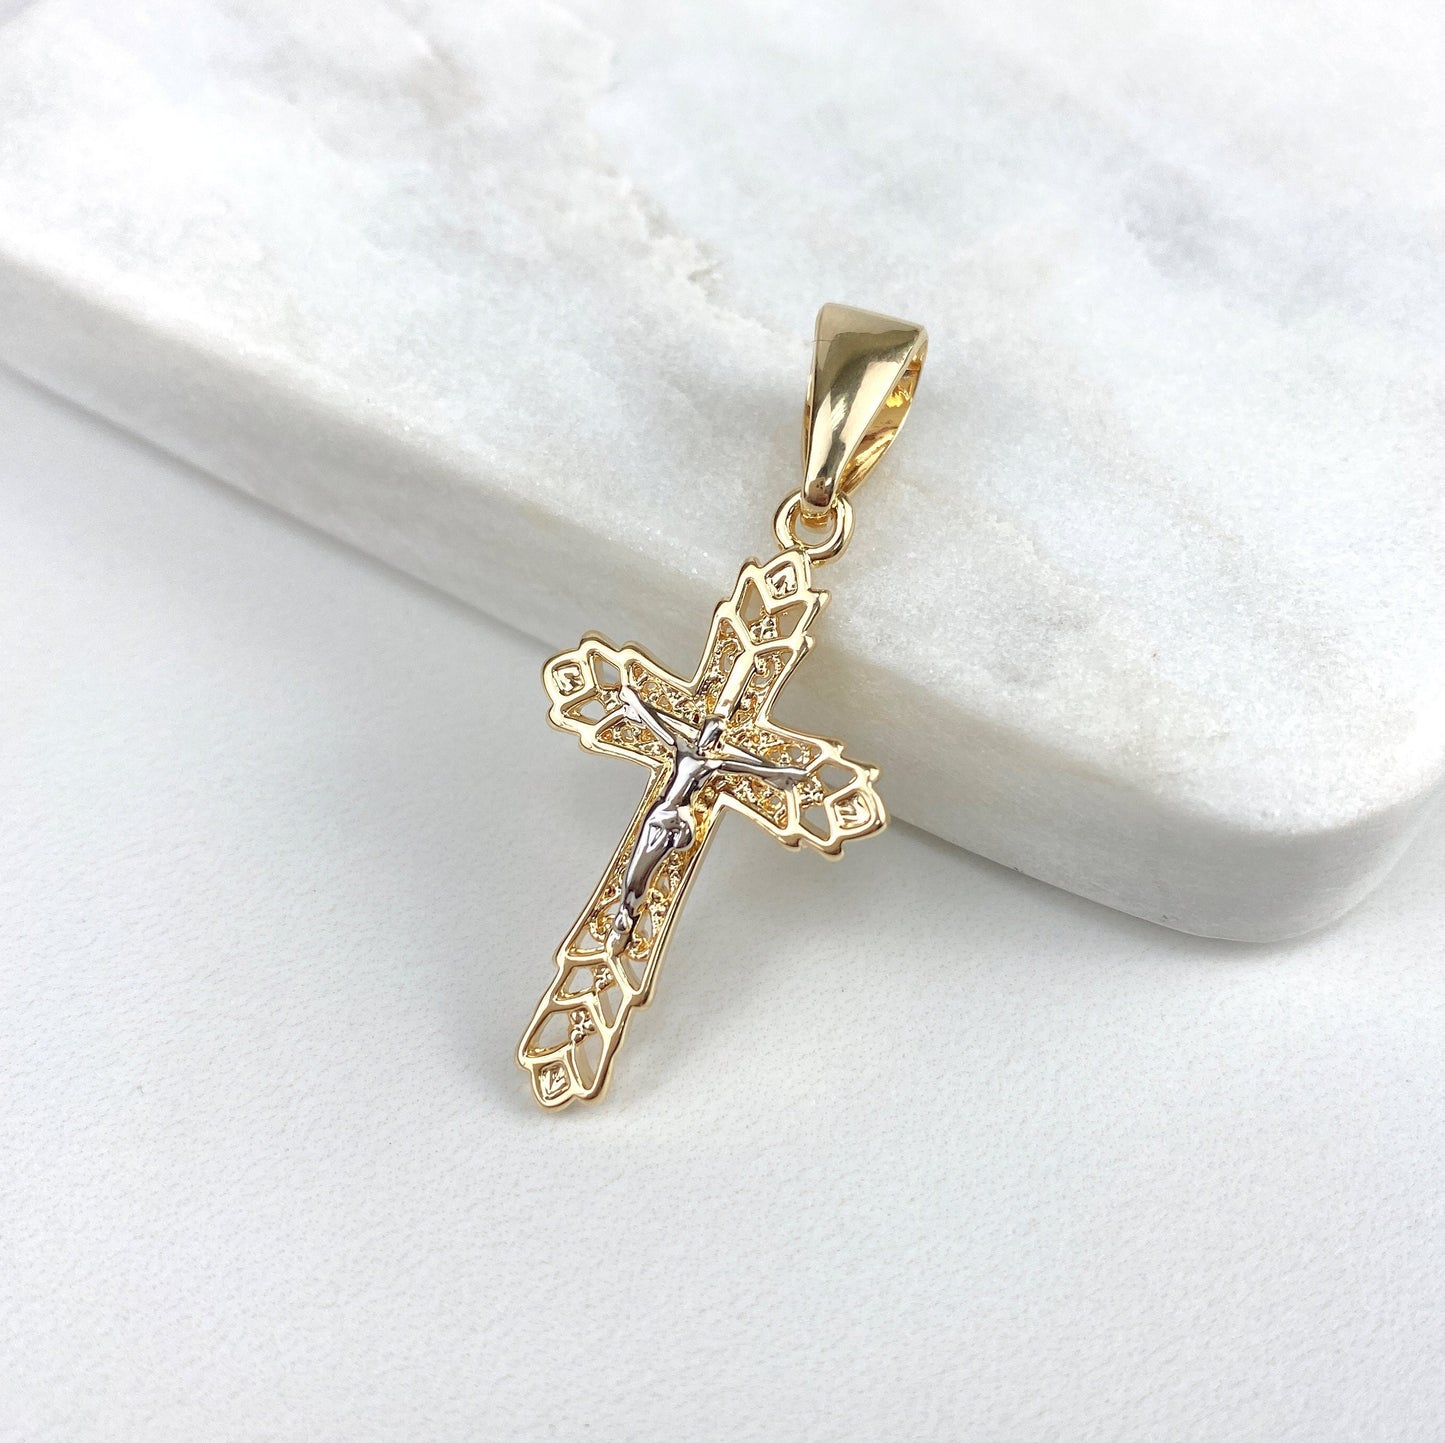 18k Gold Filled Cross Jesus, Crucifix Charms Pendant, Two Tone Gold & Silver, 1.6 Inches or 2 Inches, Wholesale Jewelry Making Supplies